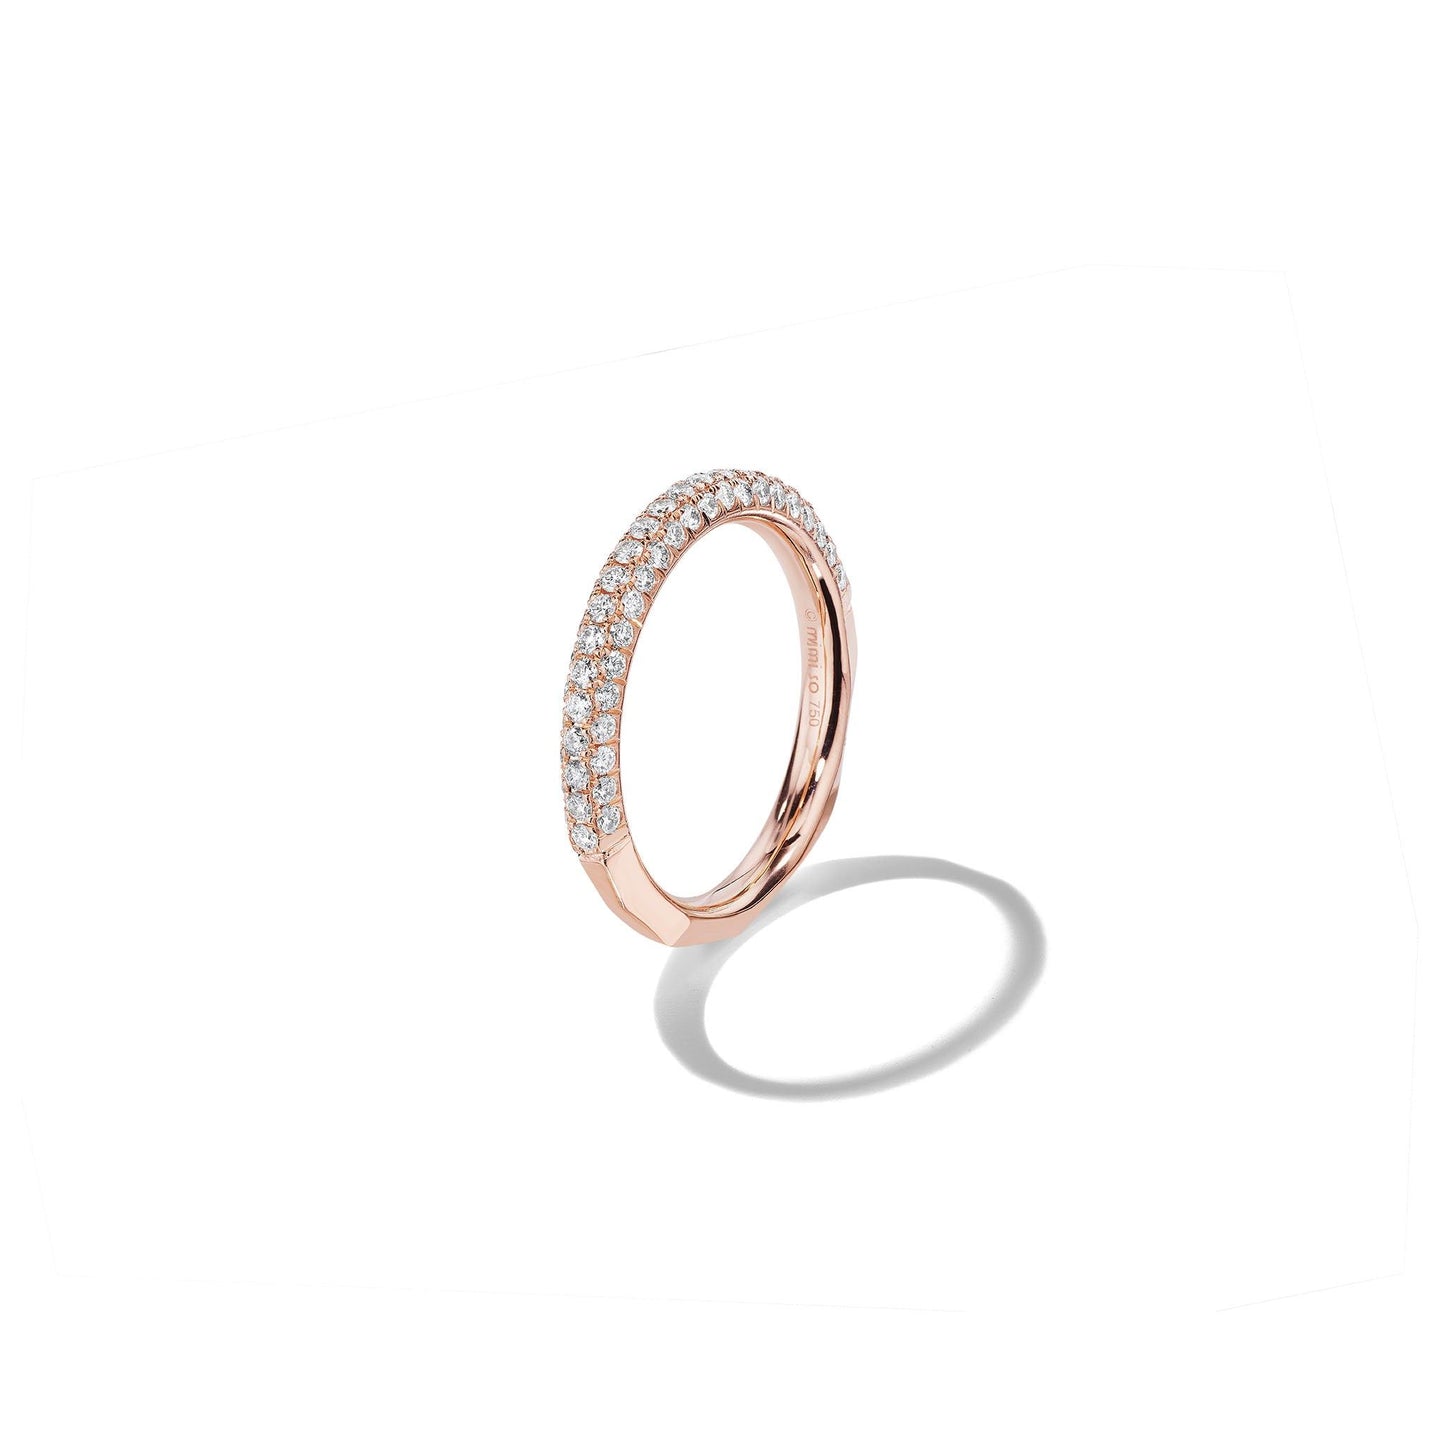 Mimi So Jackson Switch 3-Row Stackable Diamond Ring 18k Rose Gold